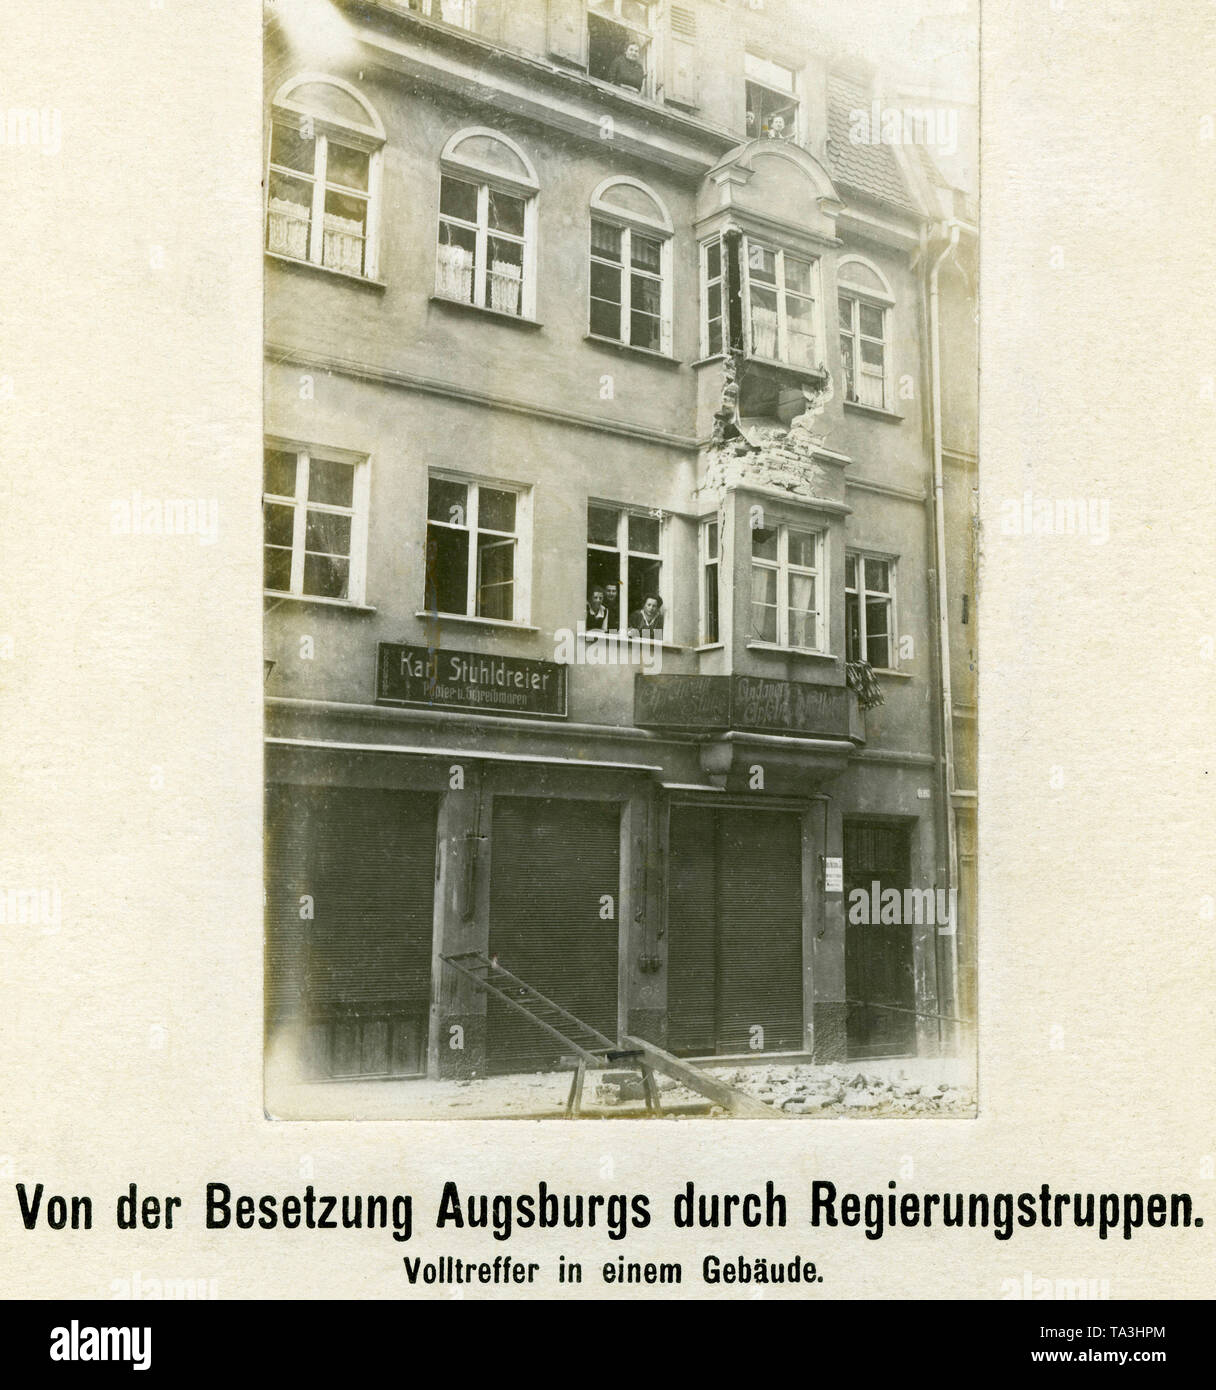 The picture shows a building damaged by a hit in Augsburg after the occupation by government troops on Easter 1919 (called 'bloody Easter' by the Augsburgs). Residents watch the photographer from their windows. Stock Photo